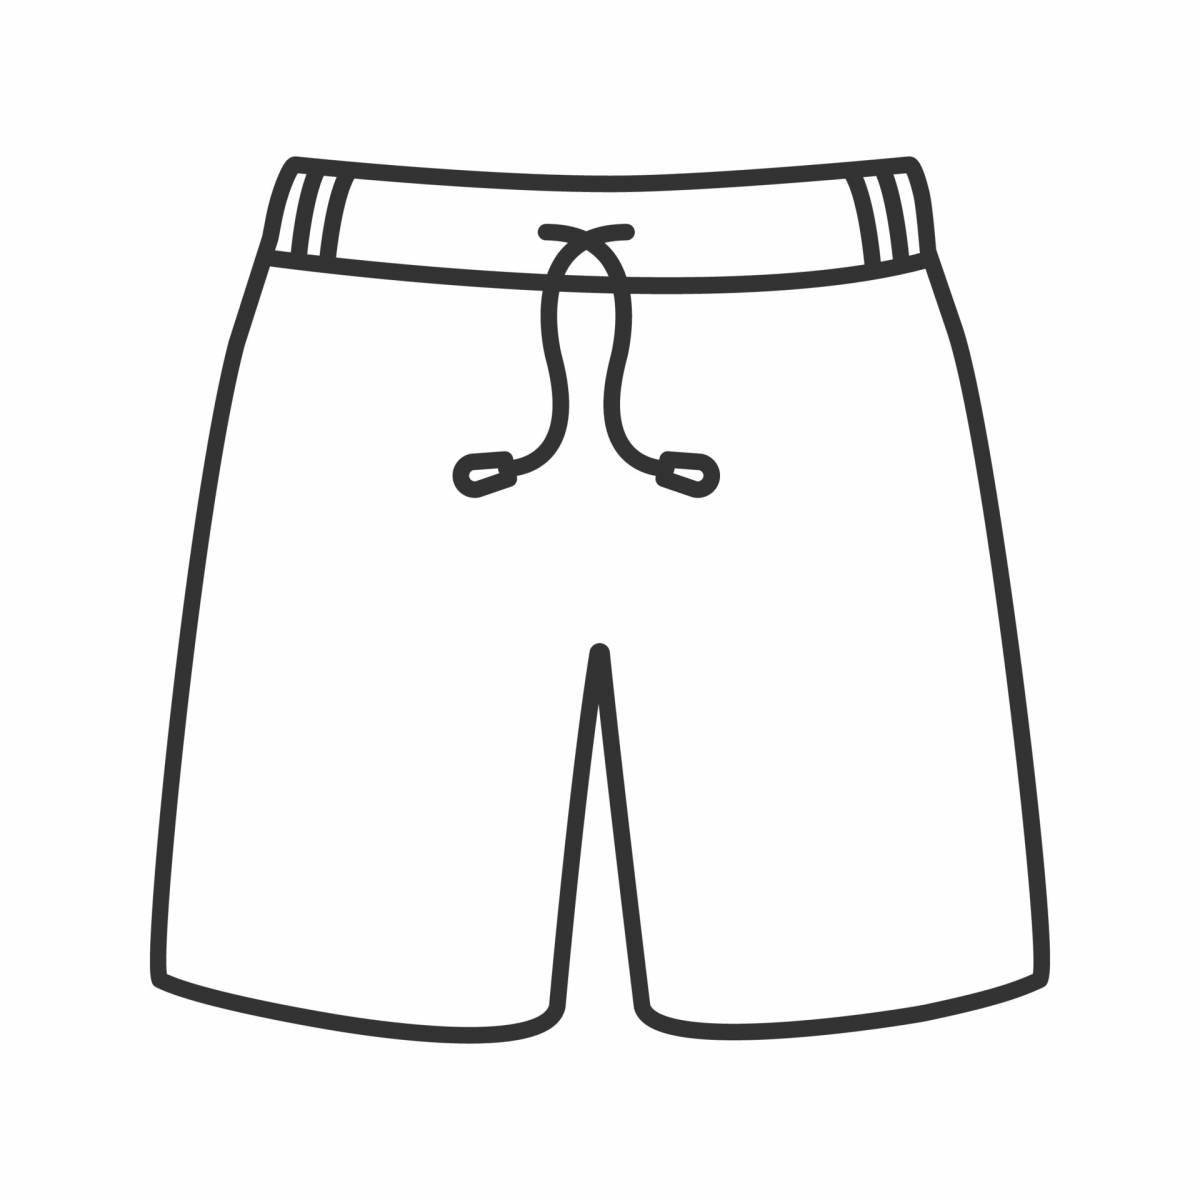 Colourful shorts coloring page